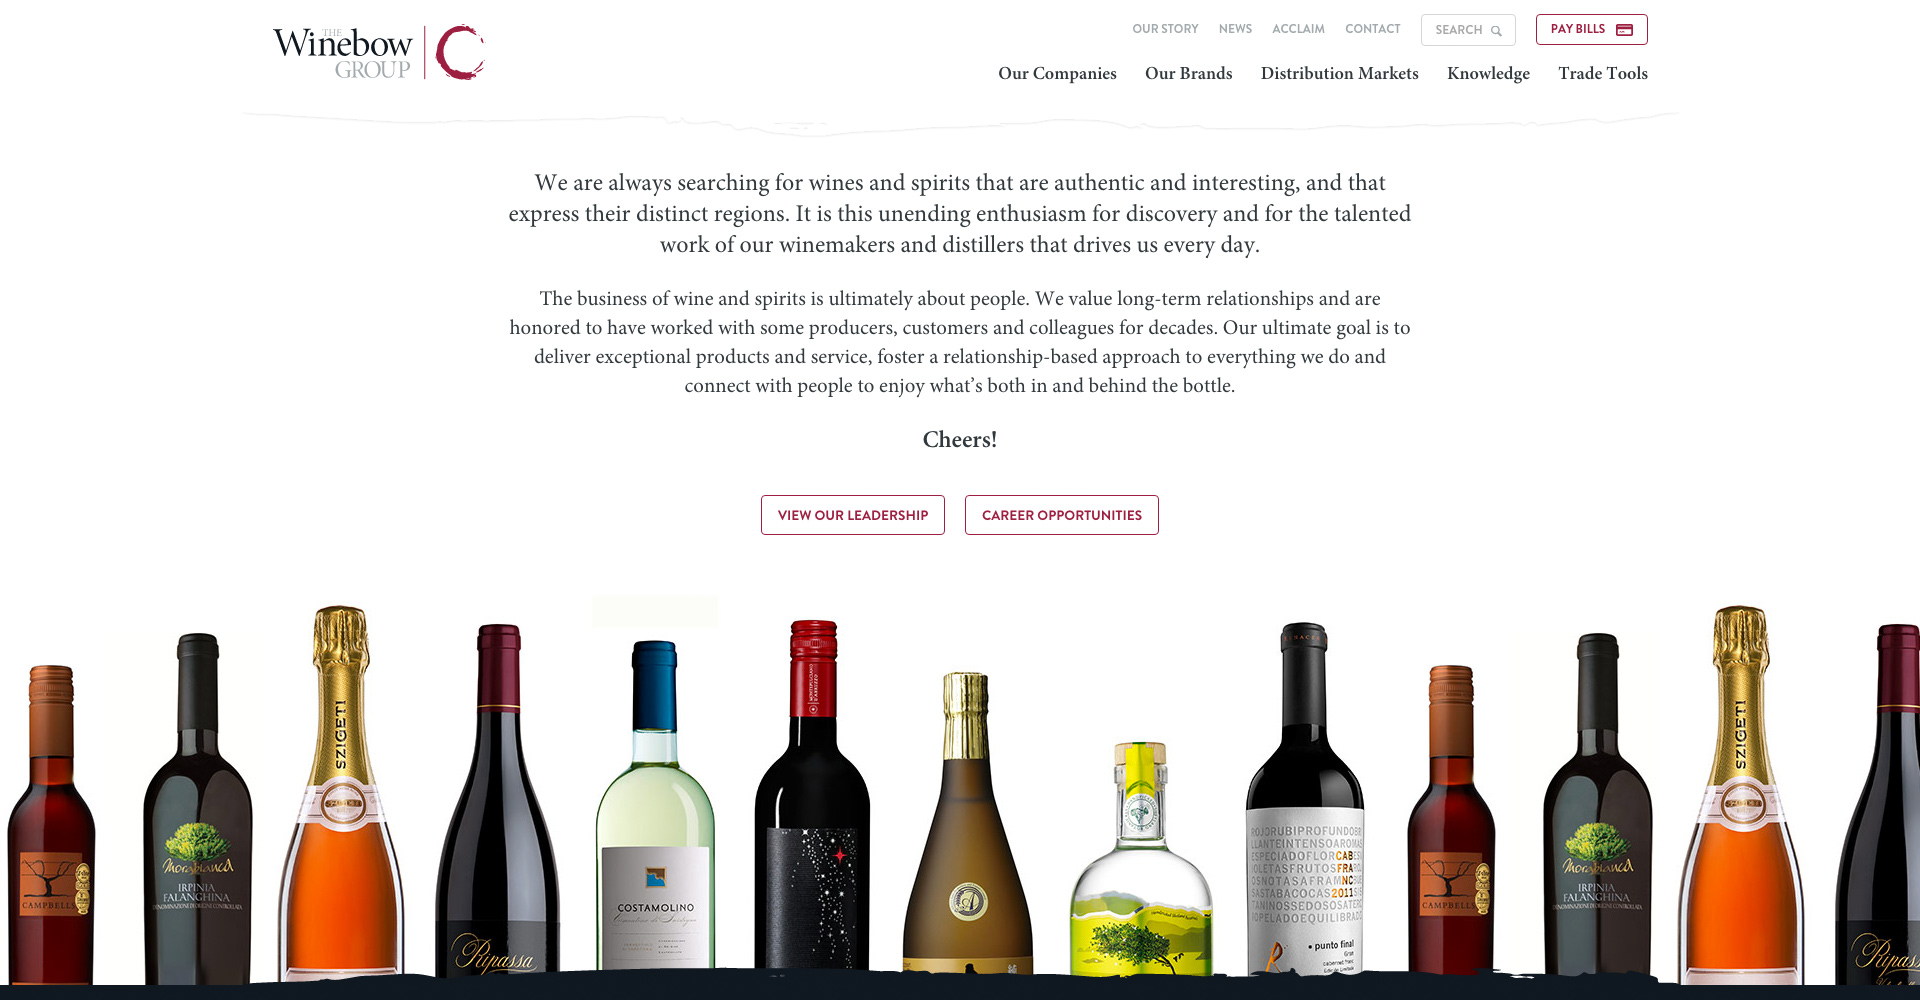 the winebow group story page